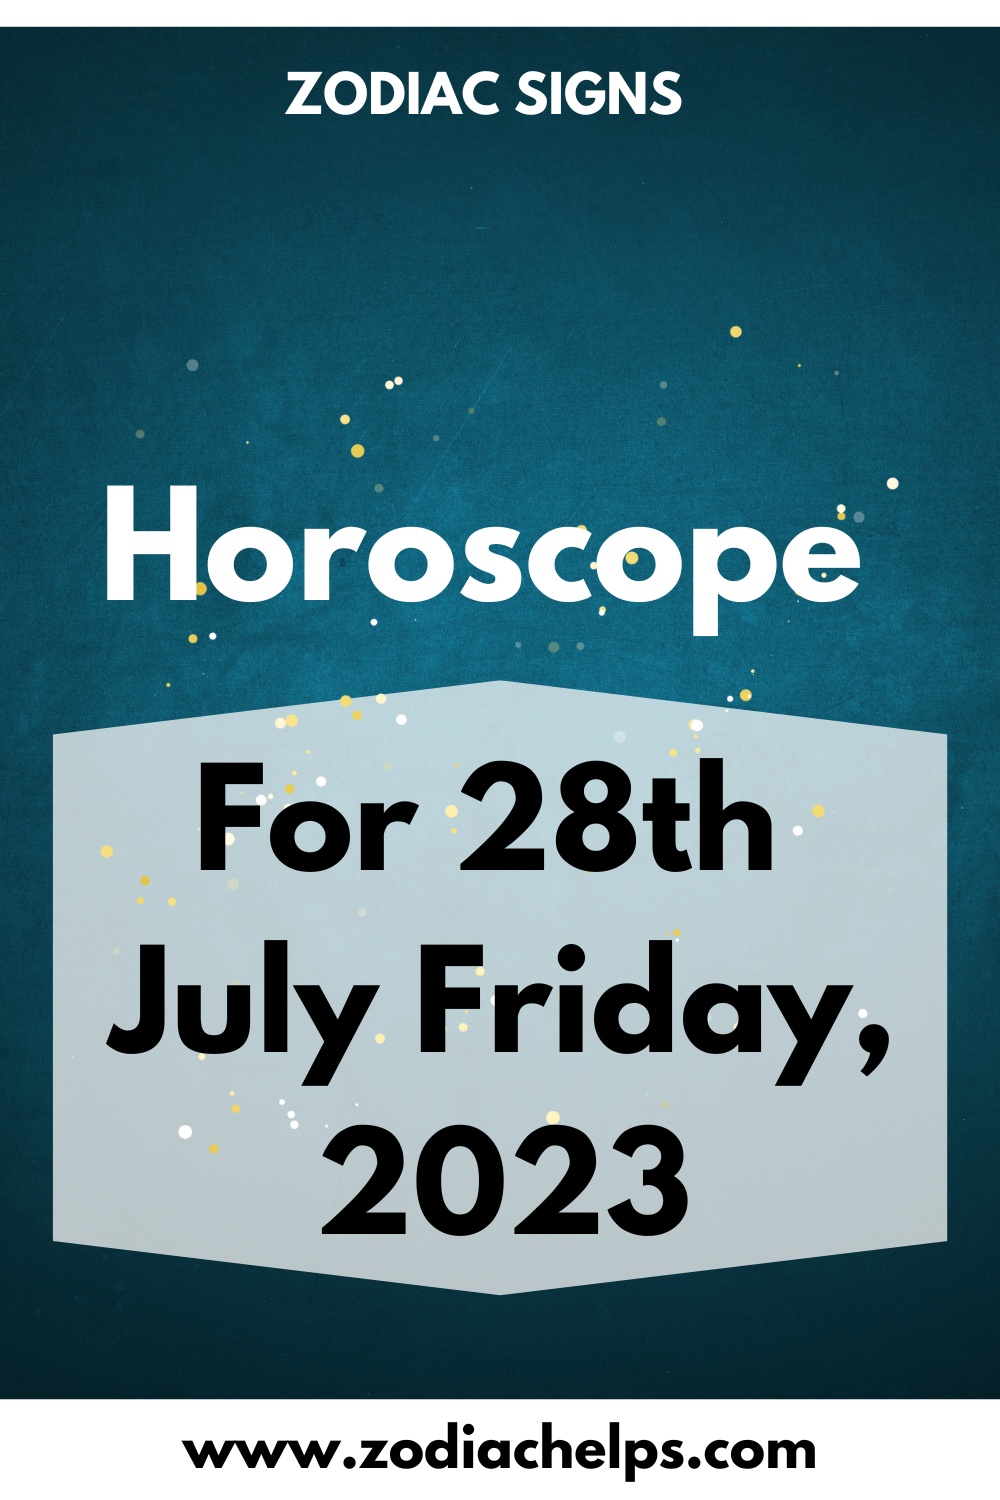 Horoscope for 28th July Friday, 2023